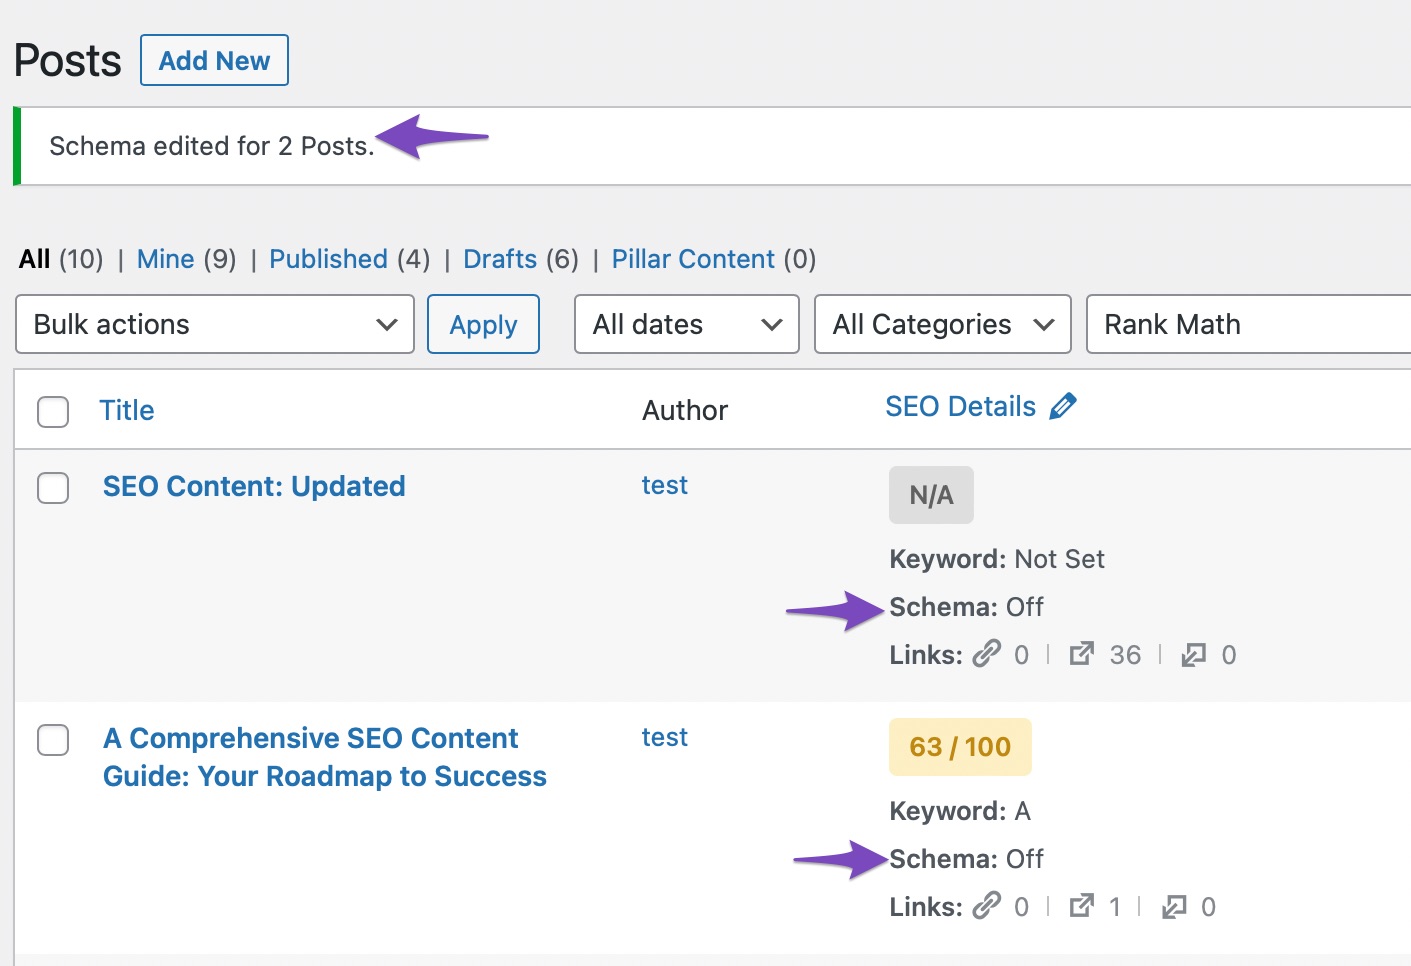 Schema removed from posts using bulk actions.